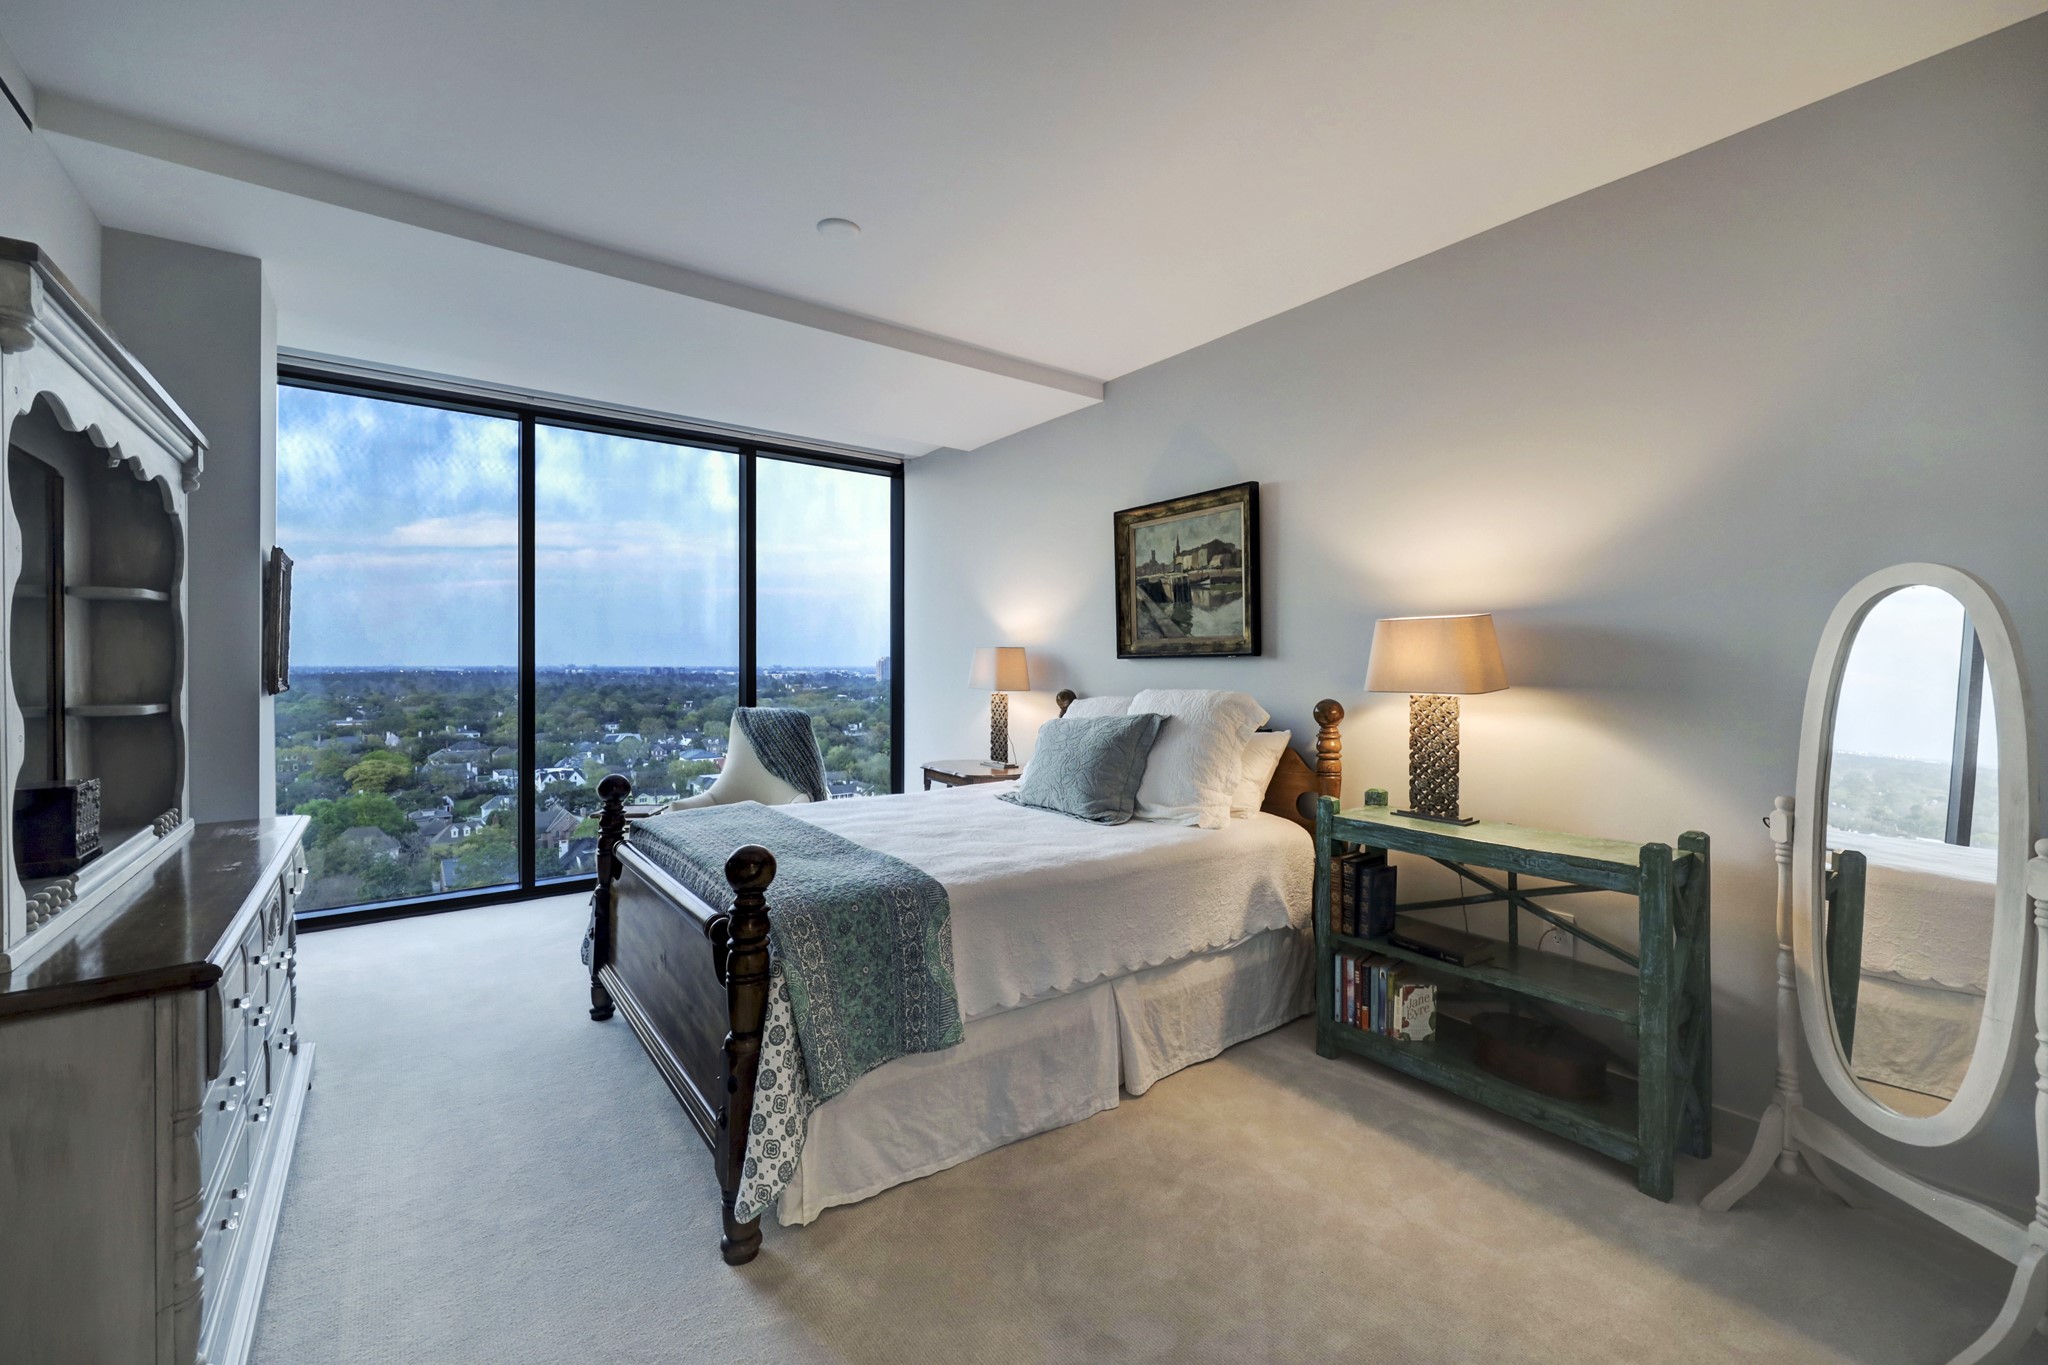 One of two secondary bedrooms that have north facing tree-top views and private baths.  This bedroom also features a large walk-in closet.